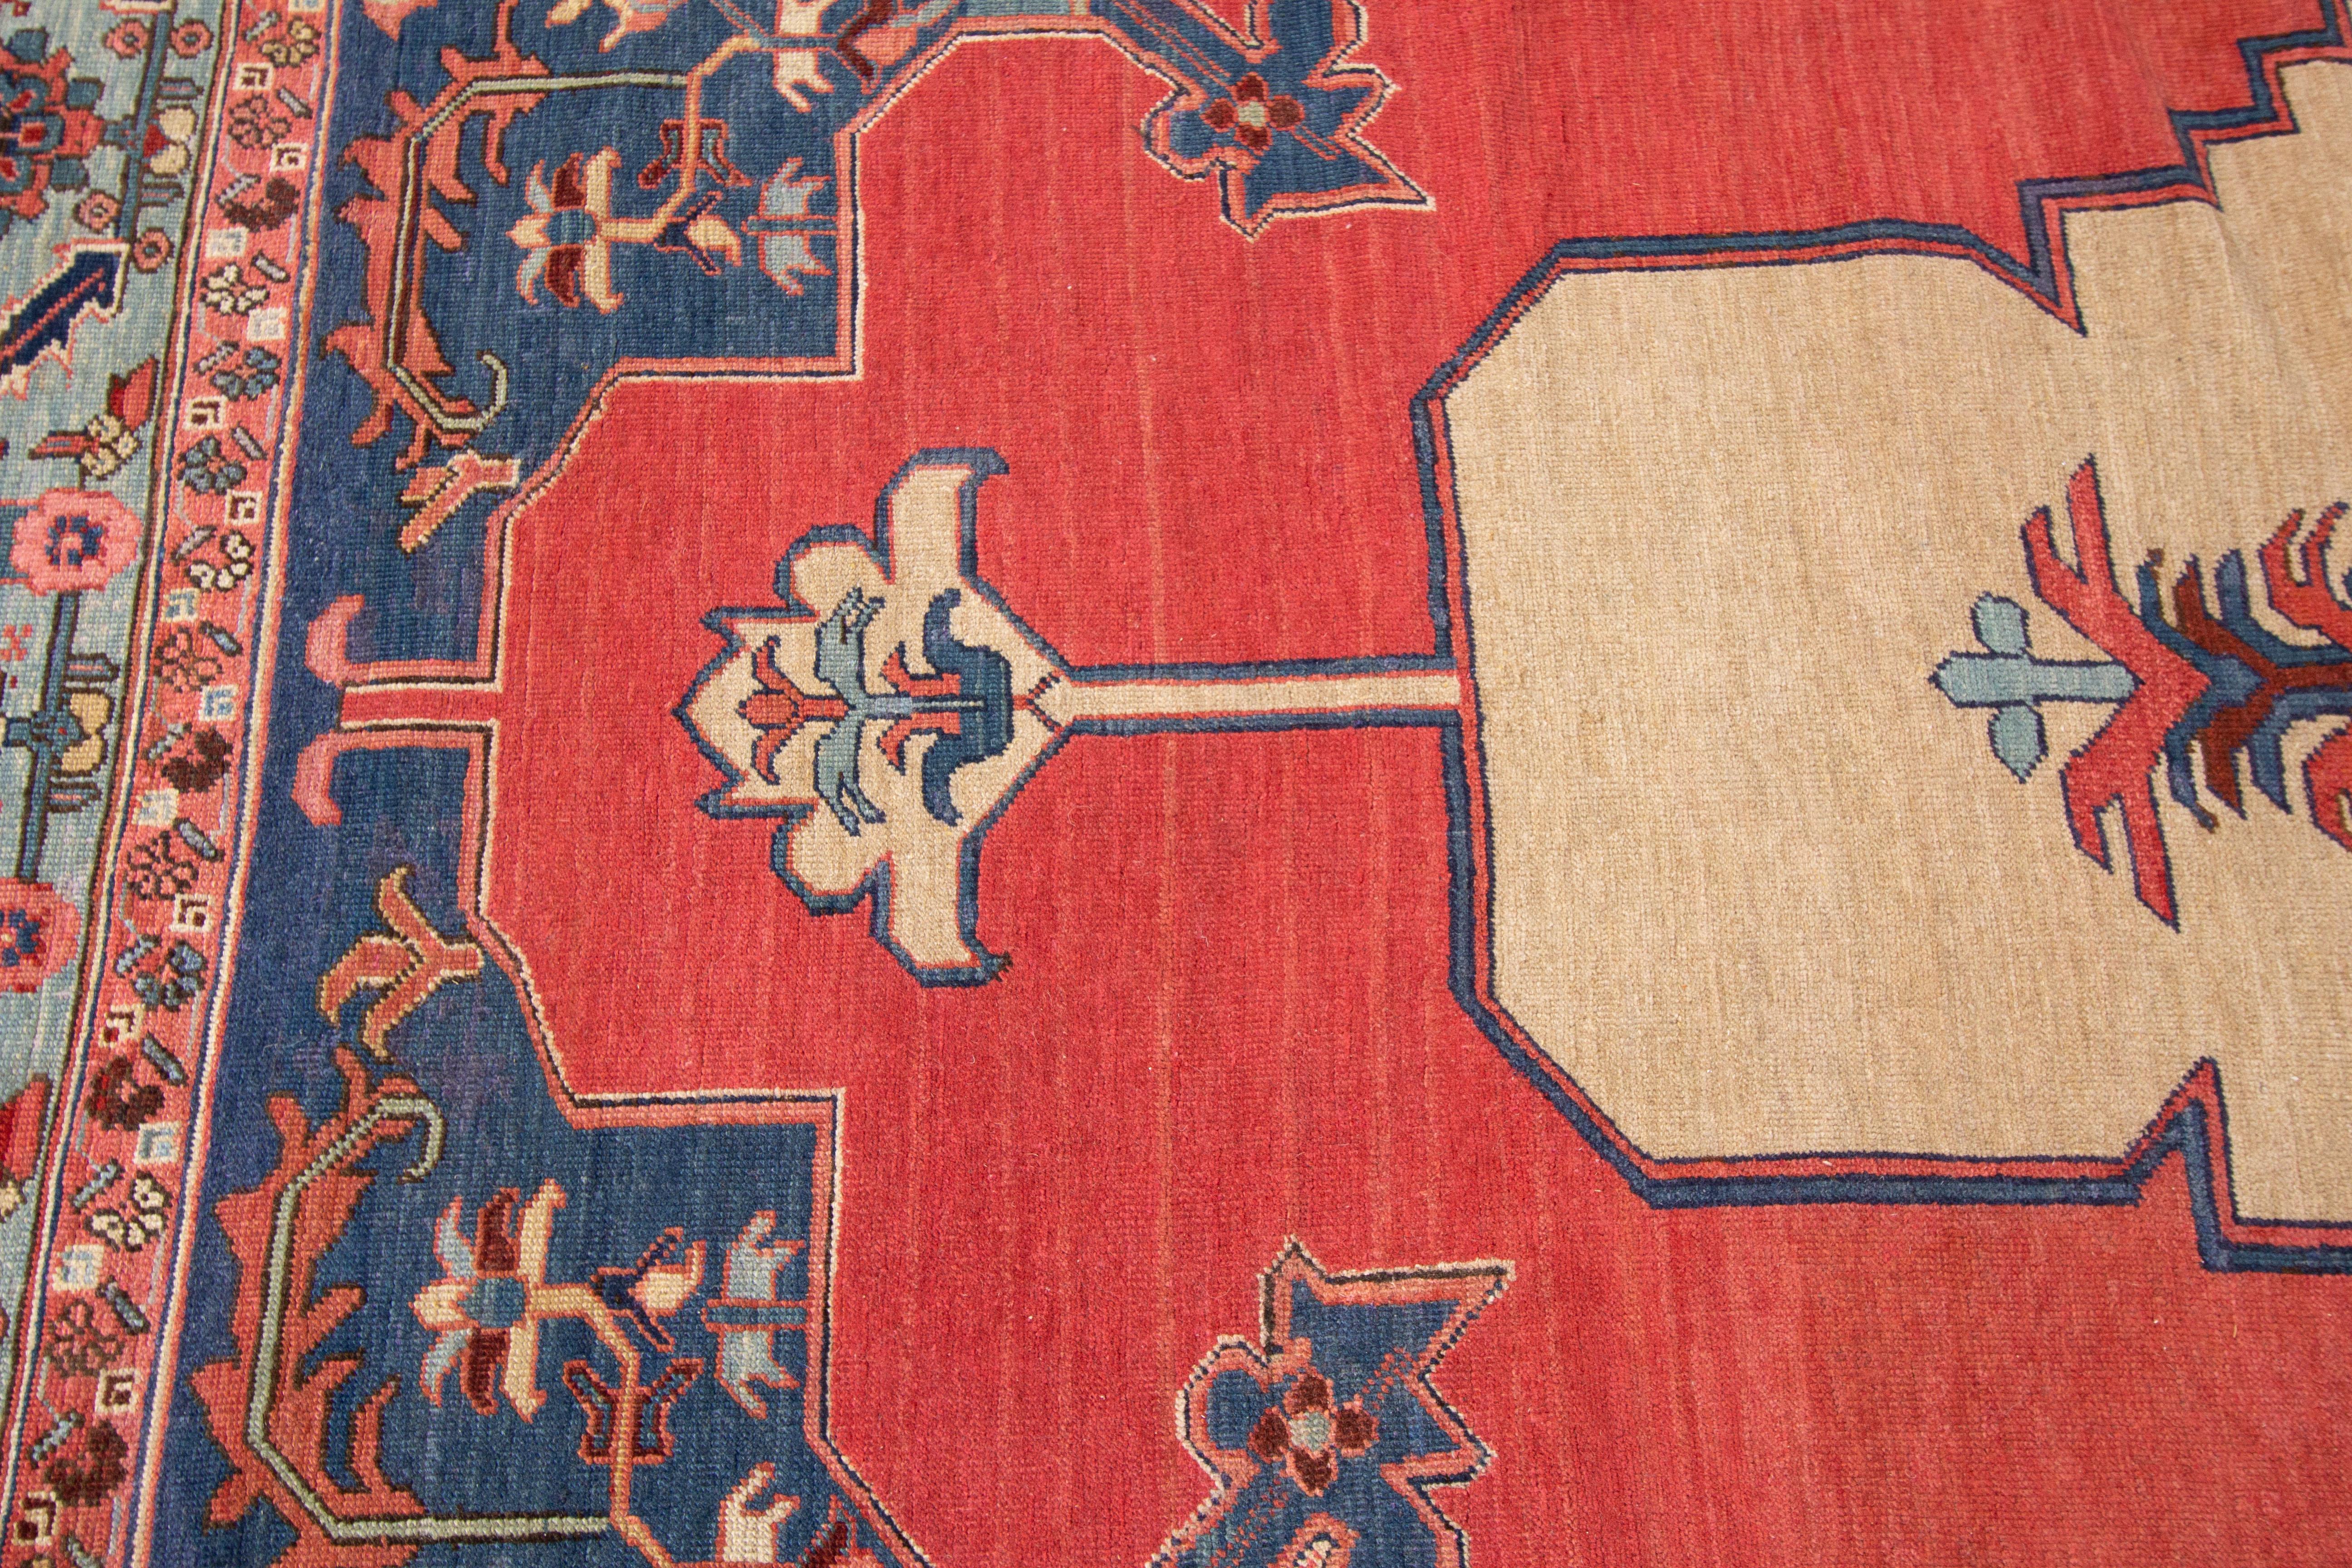 Antique Persian Bahshaeish rug (1890's) with a traditional medallion design in blue and cream on a red field. Measures approximately 11 feet 4 inches by 18 feet 5 inches.

Rug #10212224